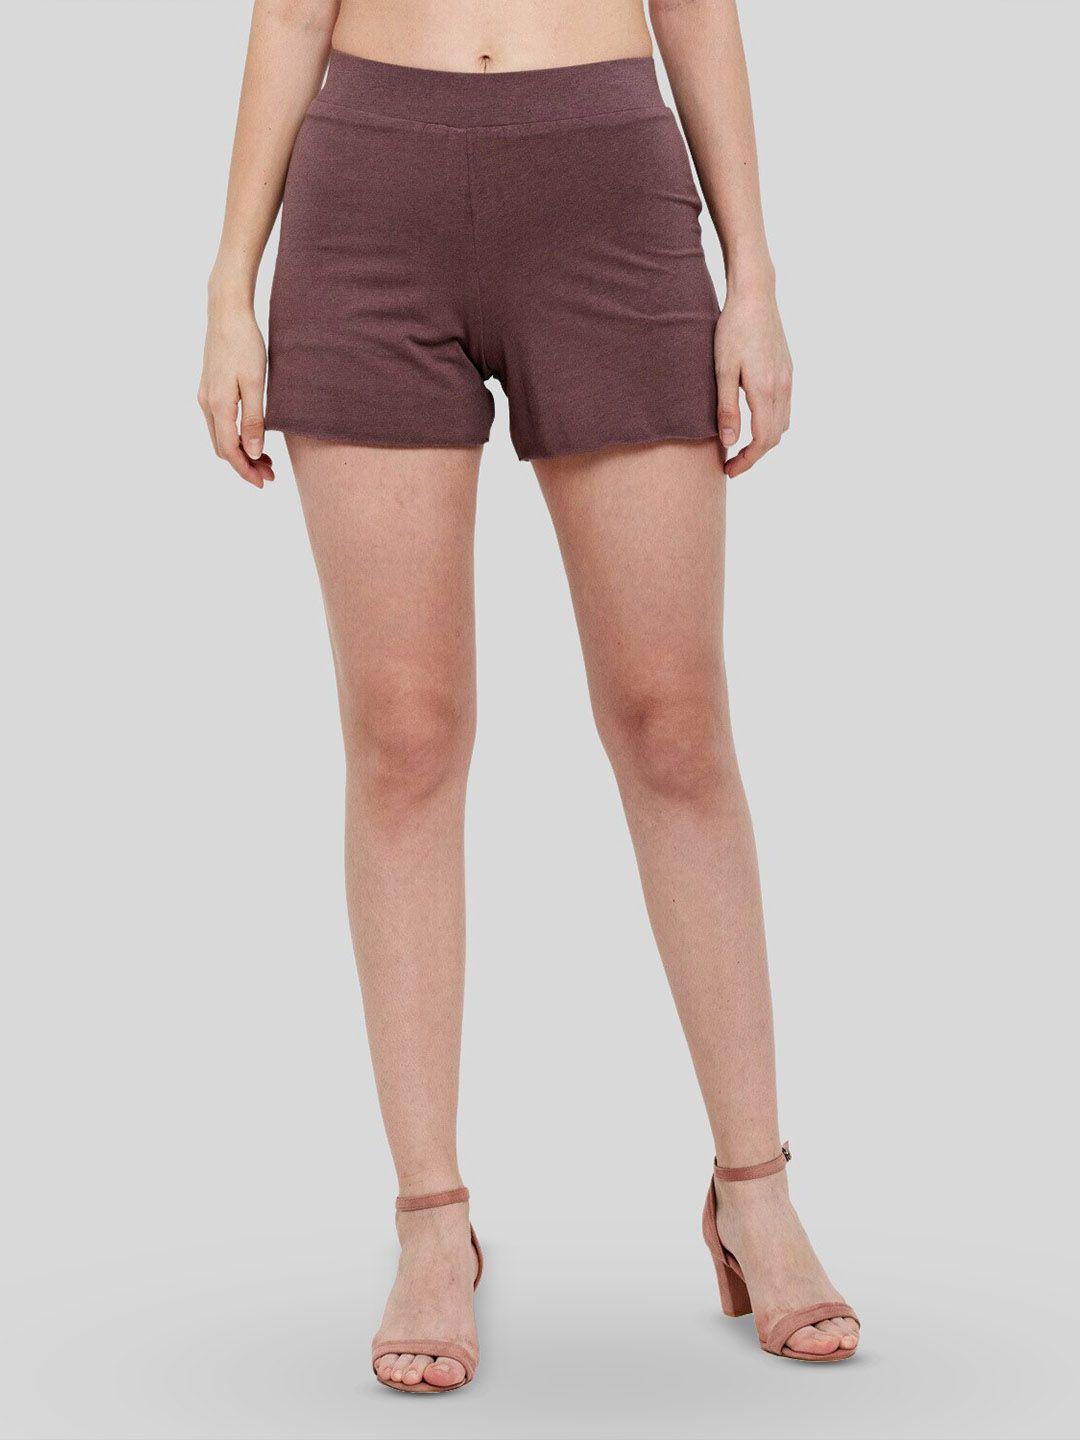 unmade women regular fit mid-rise cotton shorts